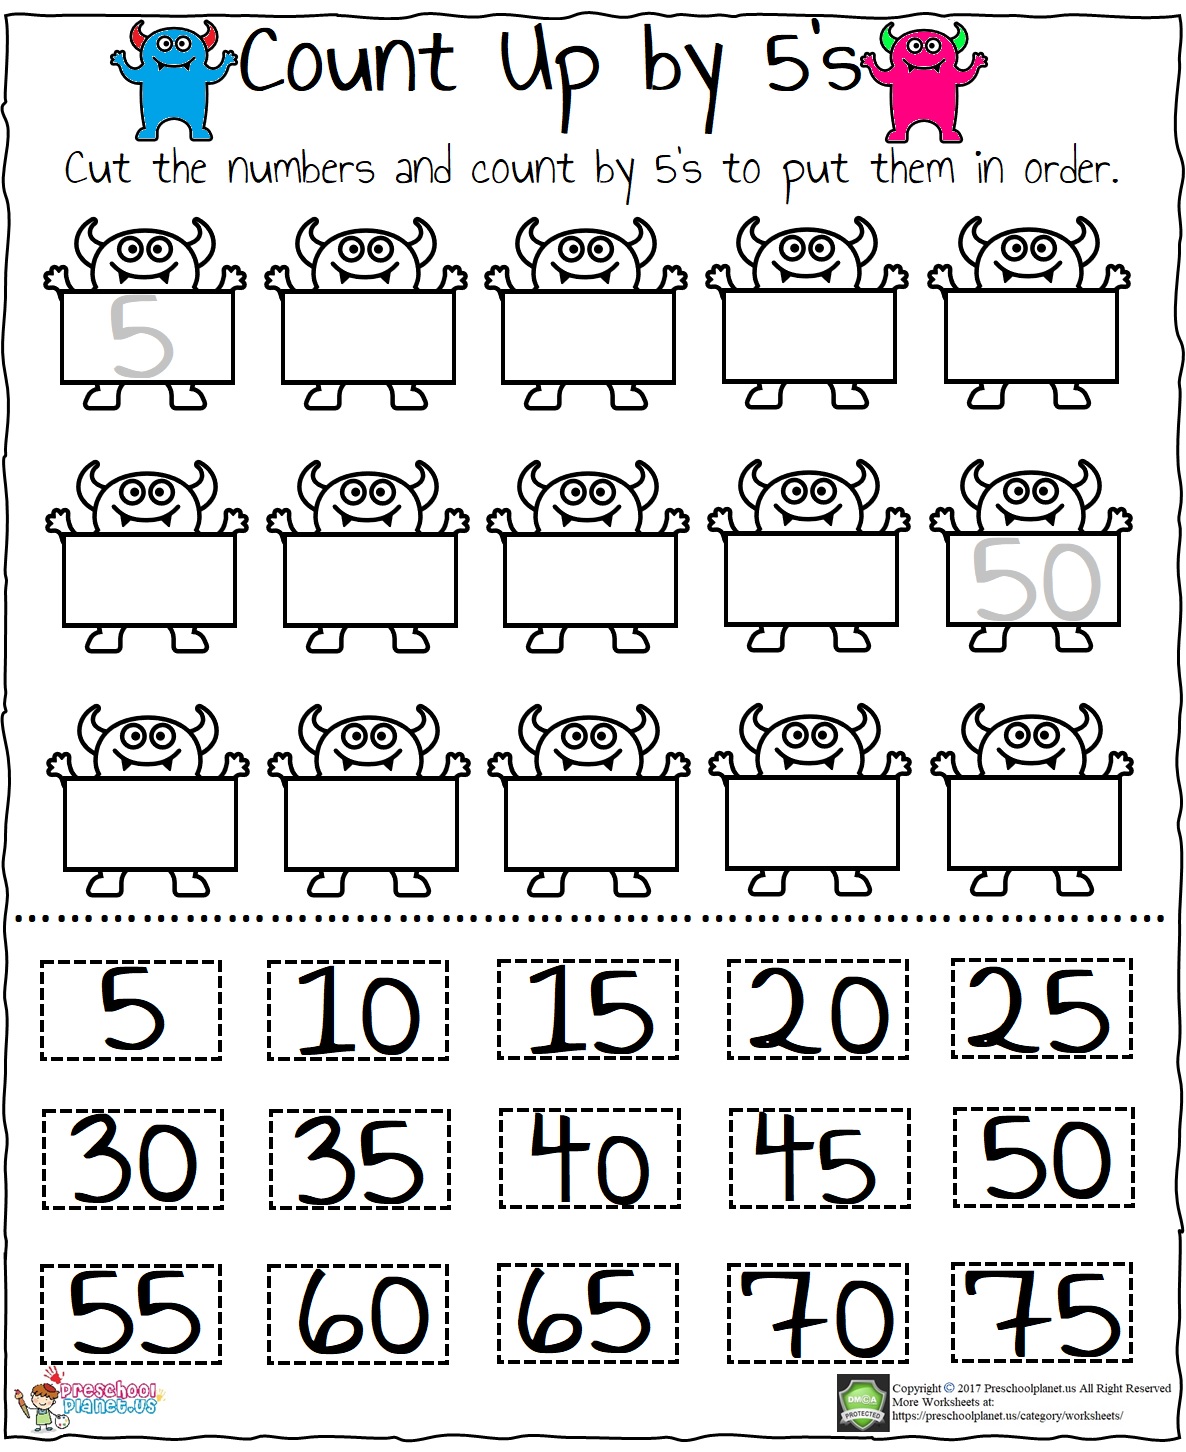 skip-counting-by-5s-worksheet